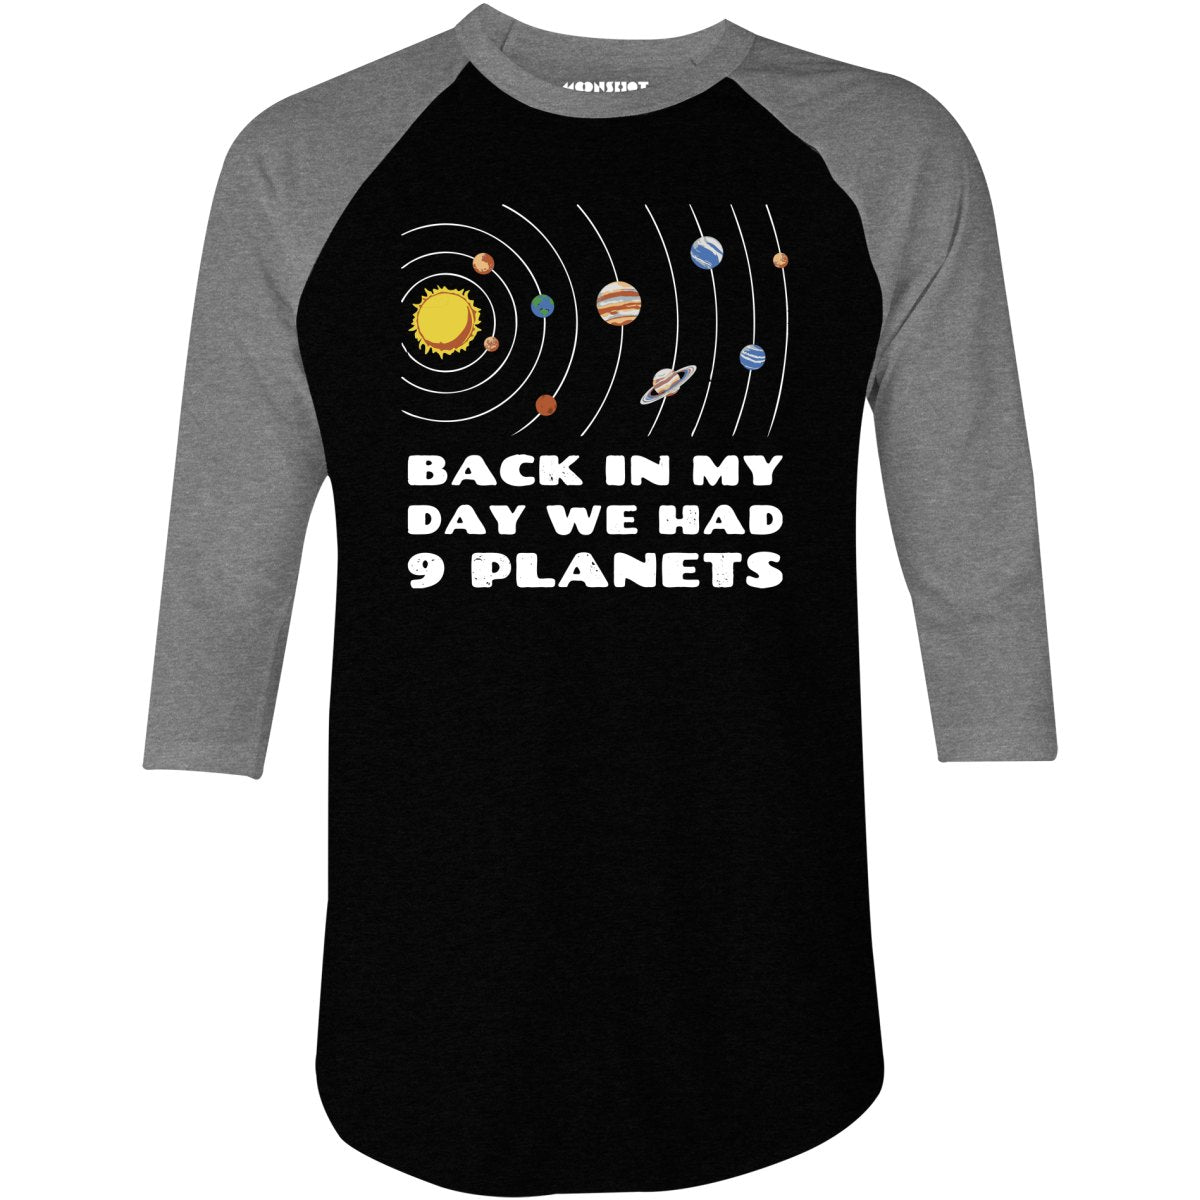 Back in My Day We Had 9 Planets - 3/4 Sleeve Raglan T-Shirt